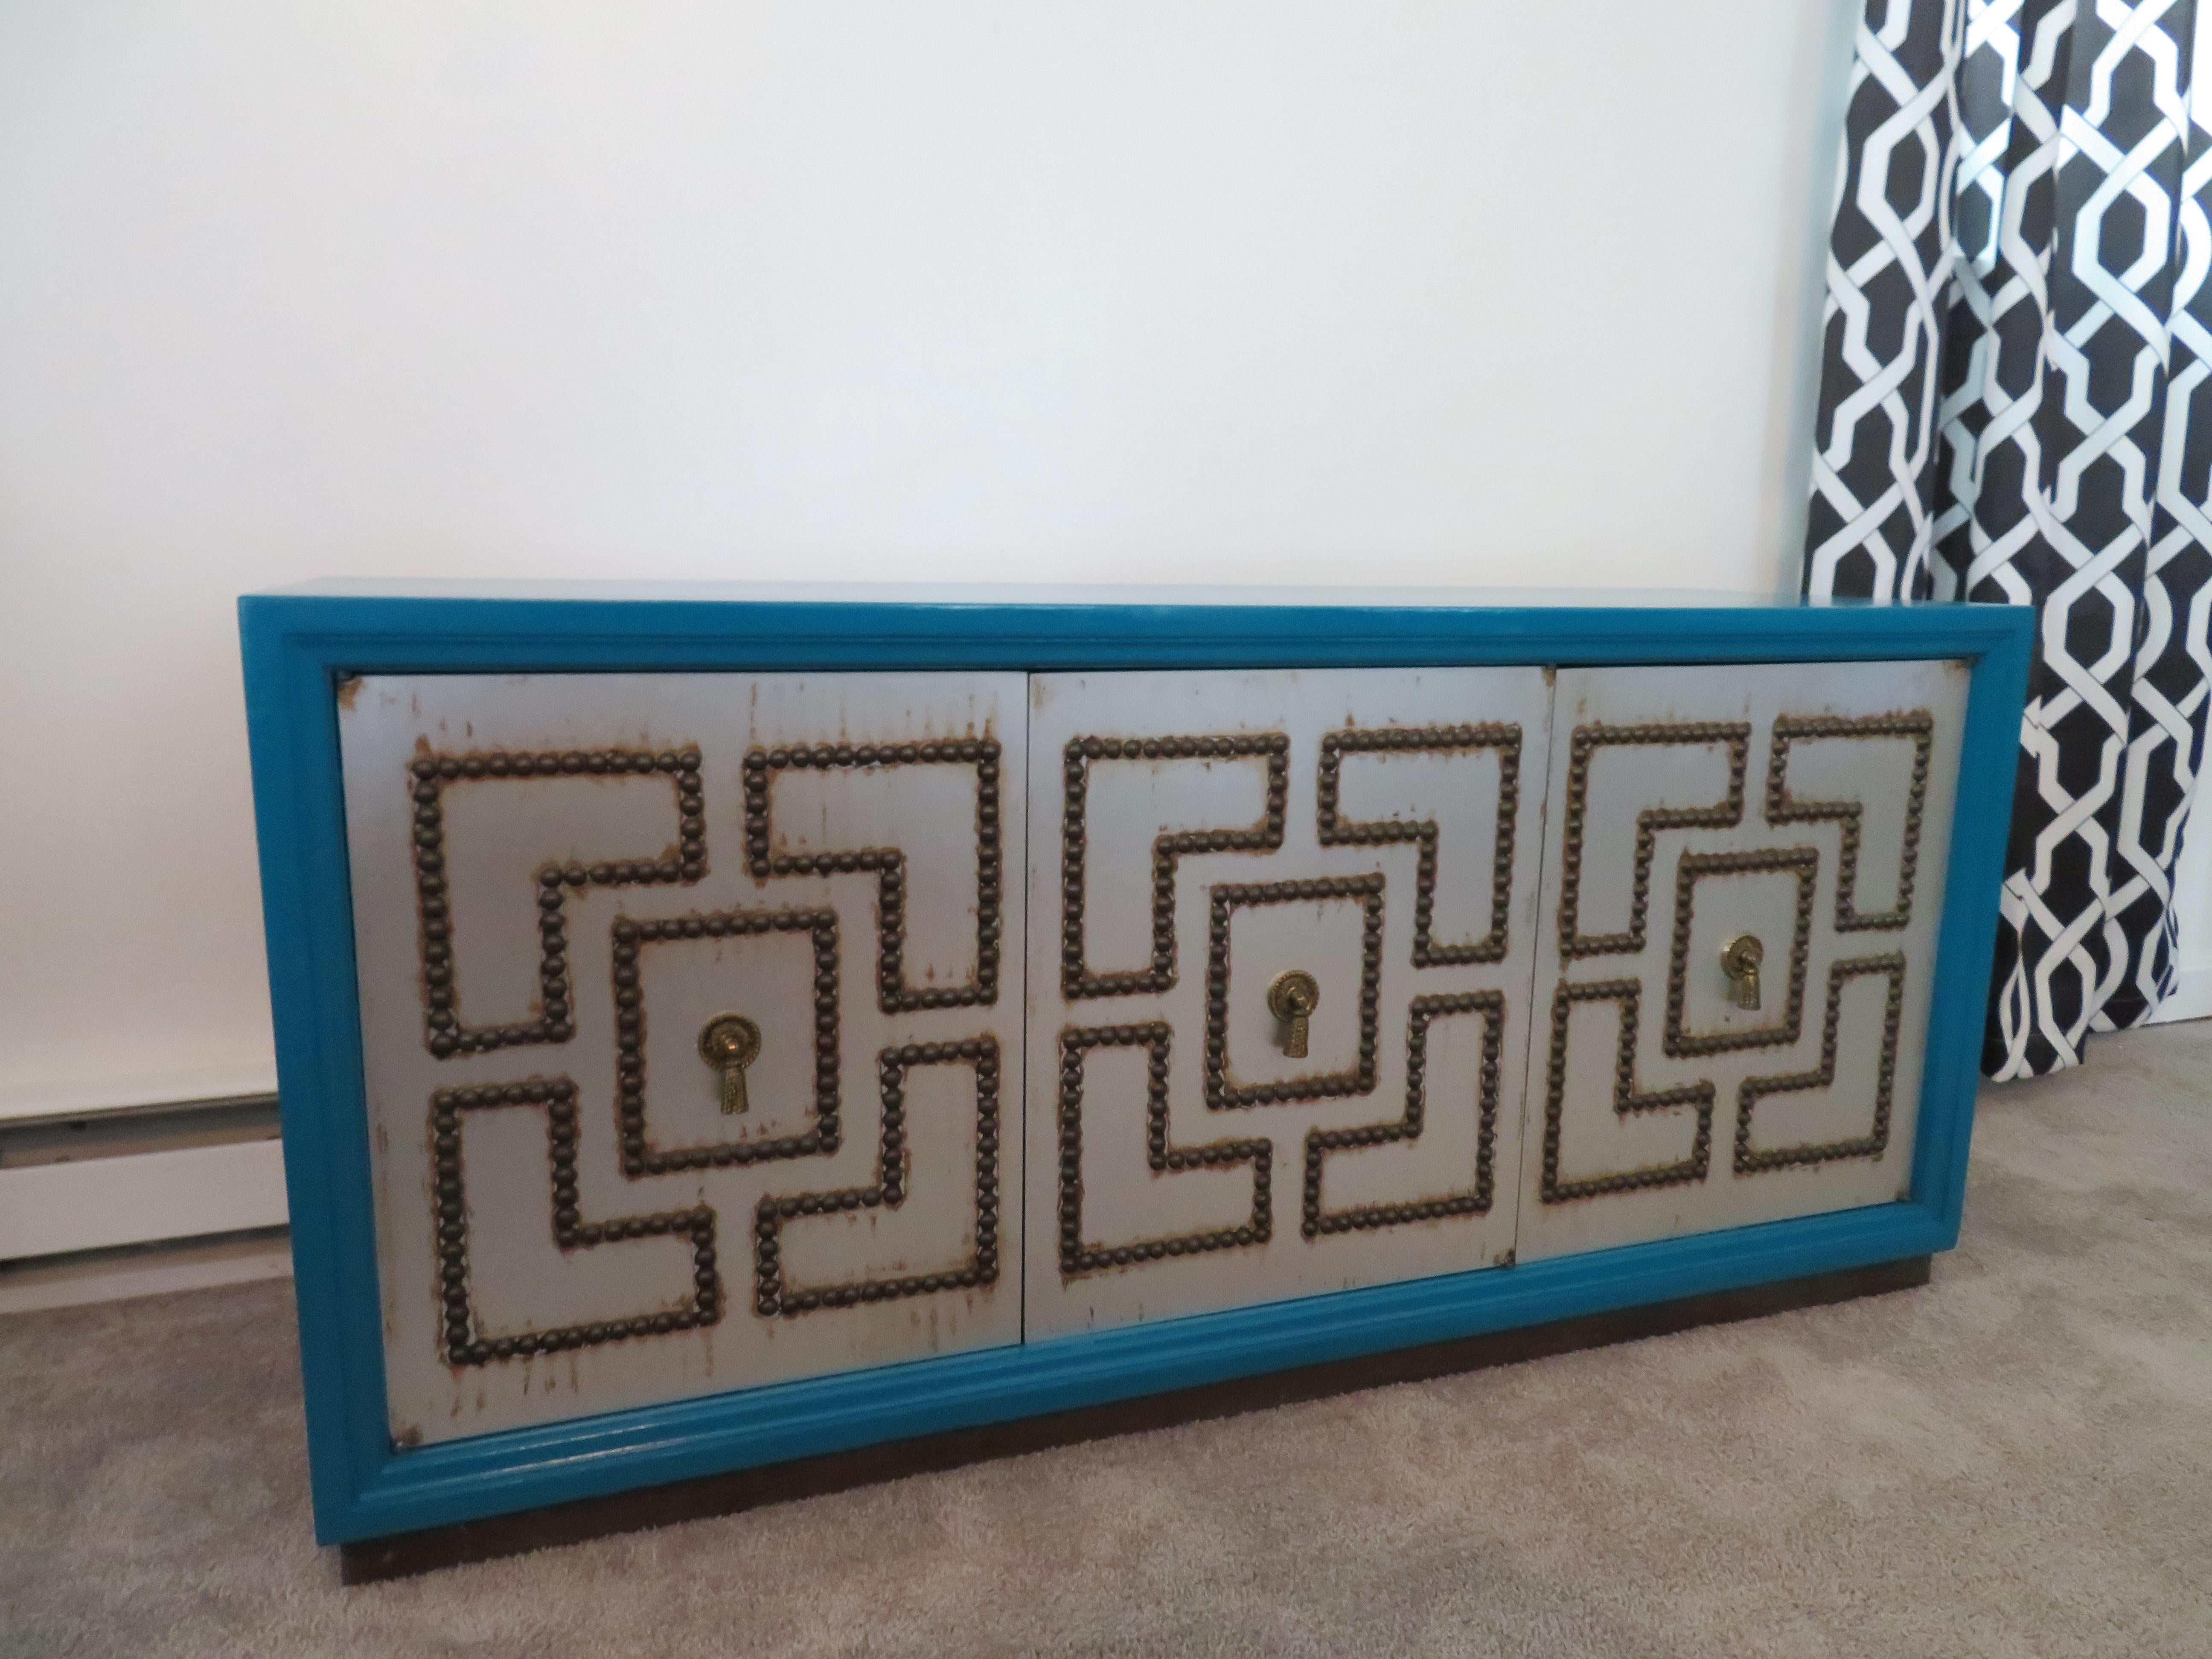 Stunning petite Parzinger style console credenza with newly hand painted finish. We love the peacock blue color against the wonderful patterned studded door fronts.